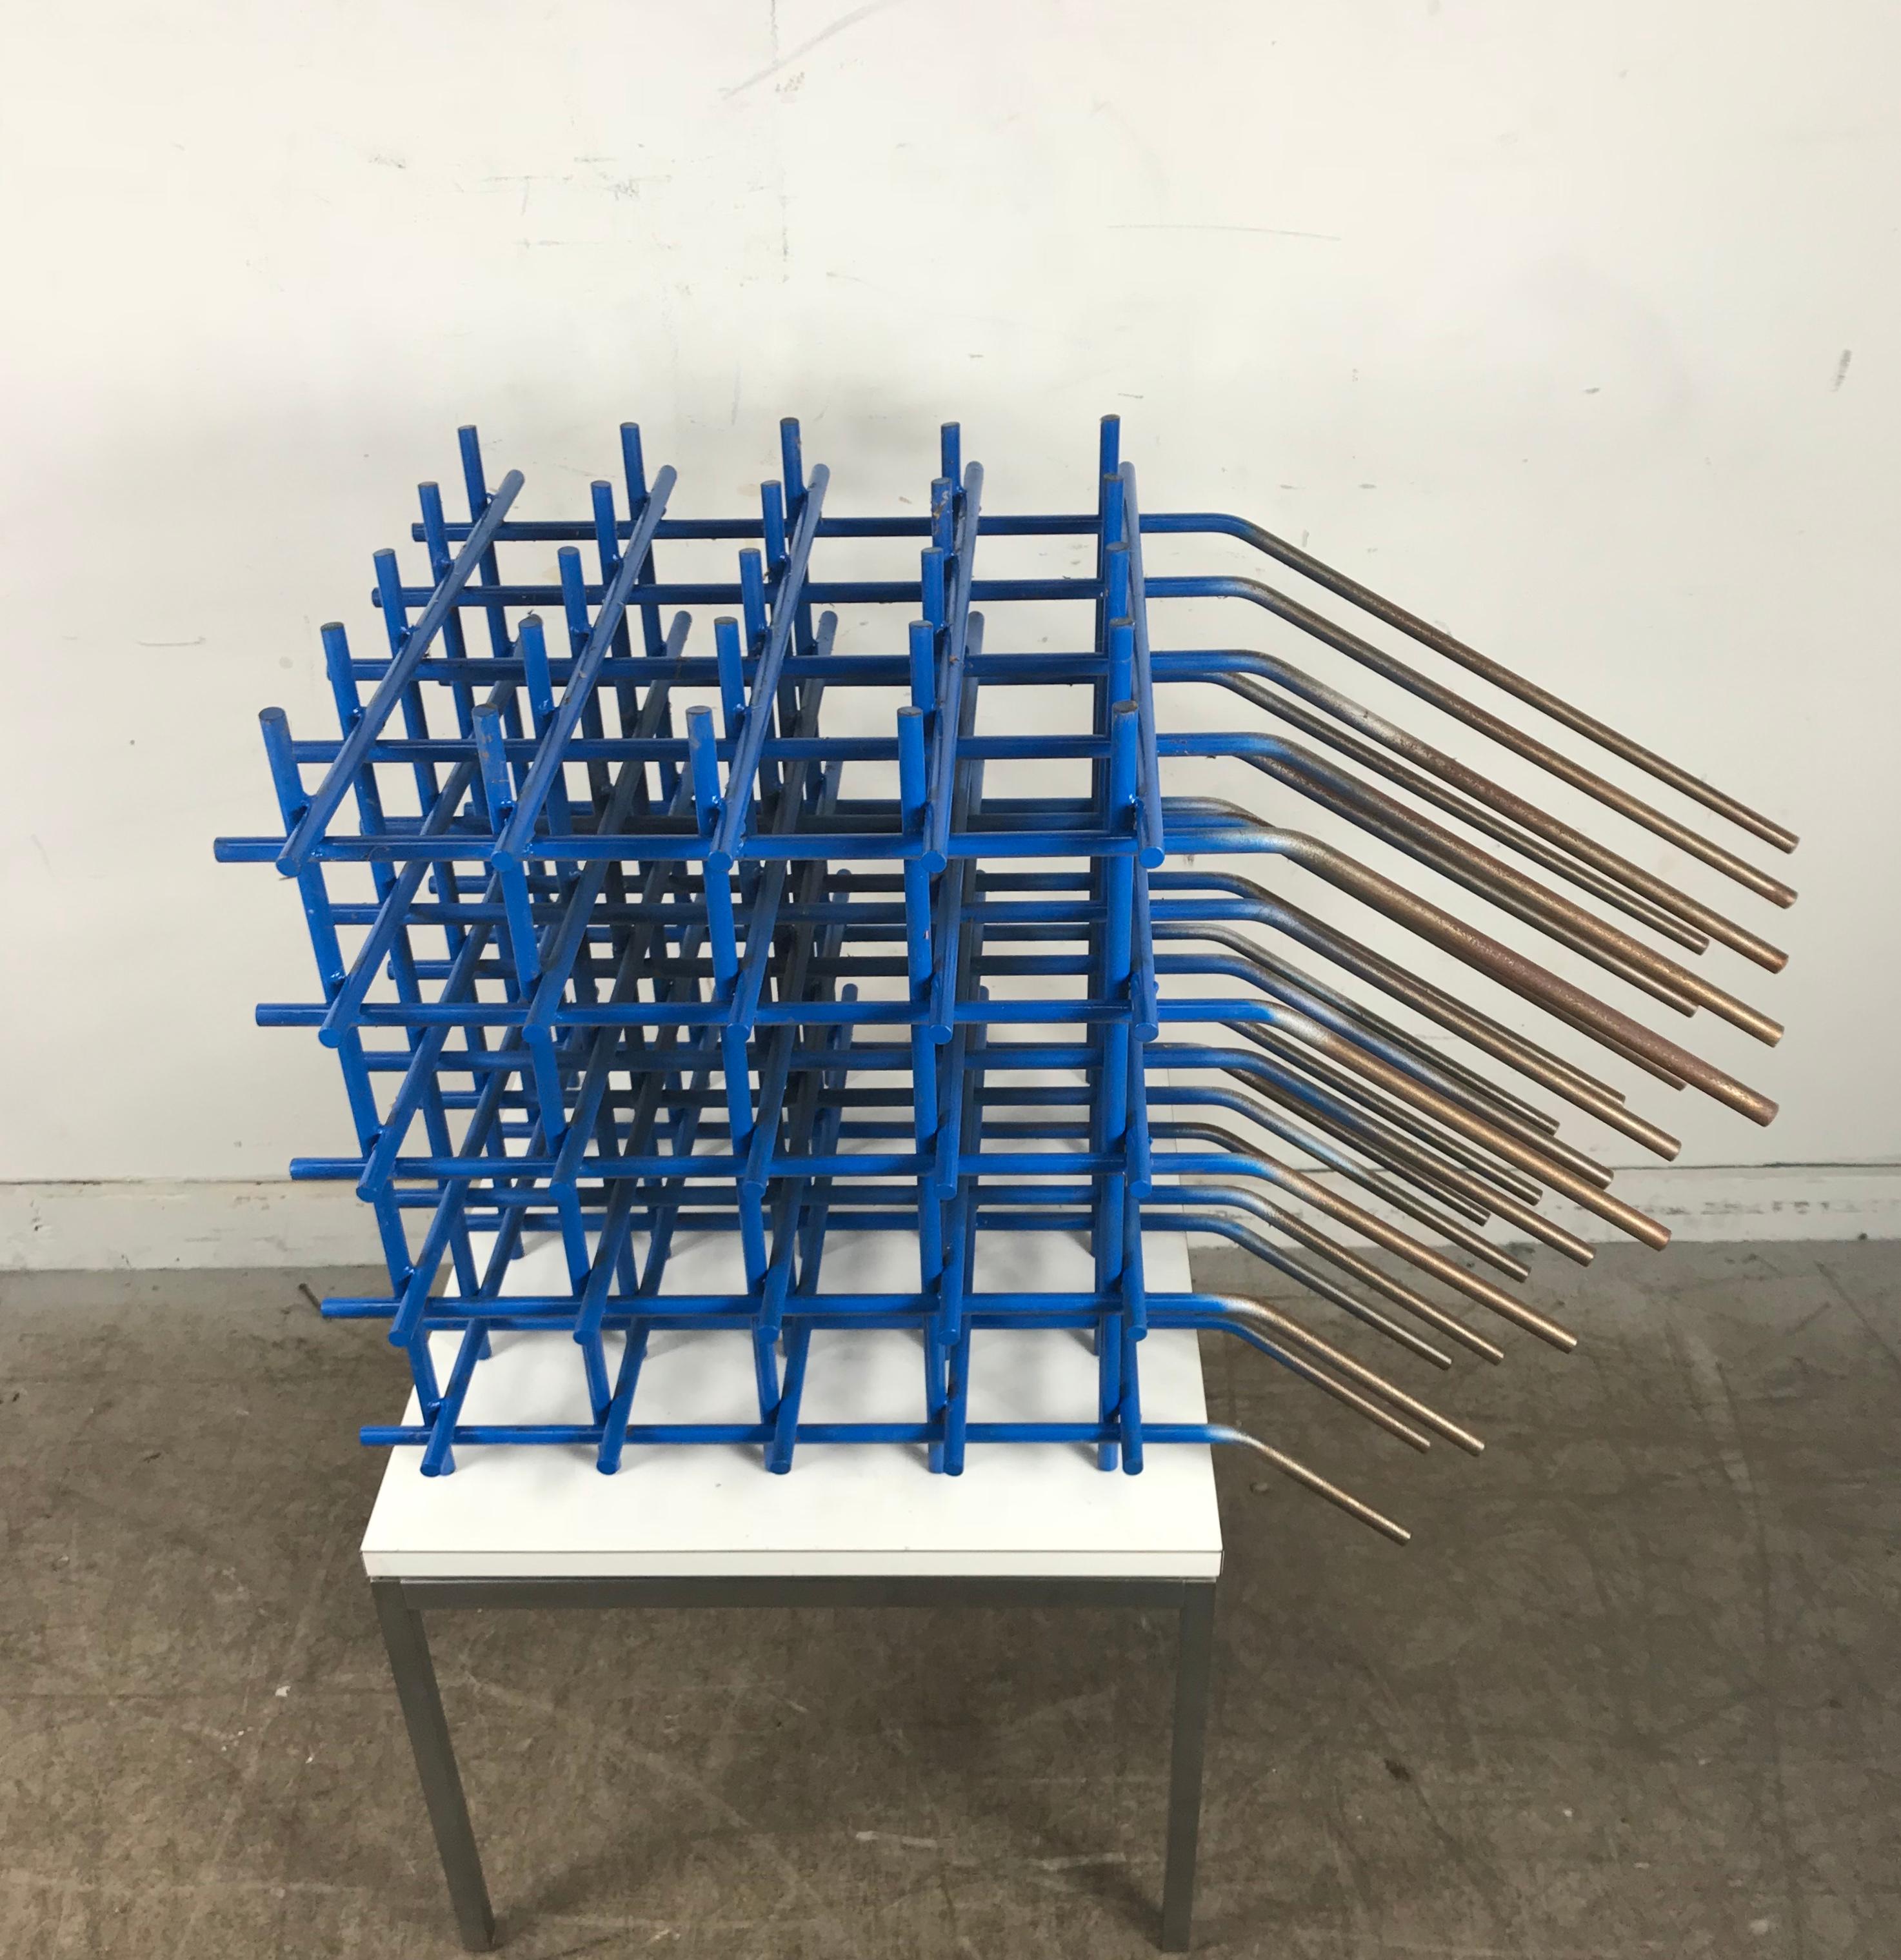 Painted Modernist Abstract Welded Steel Sculpture 